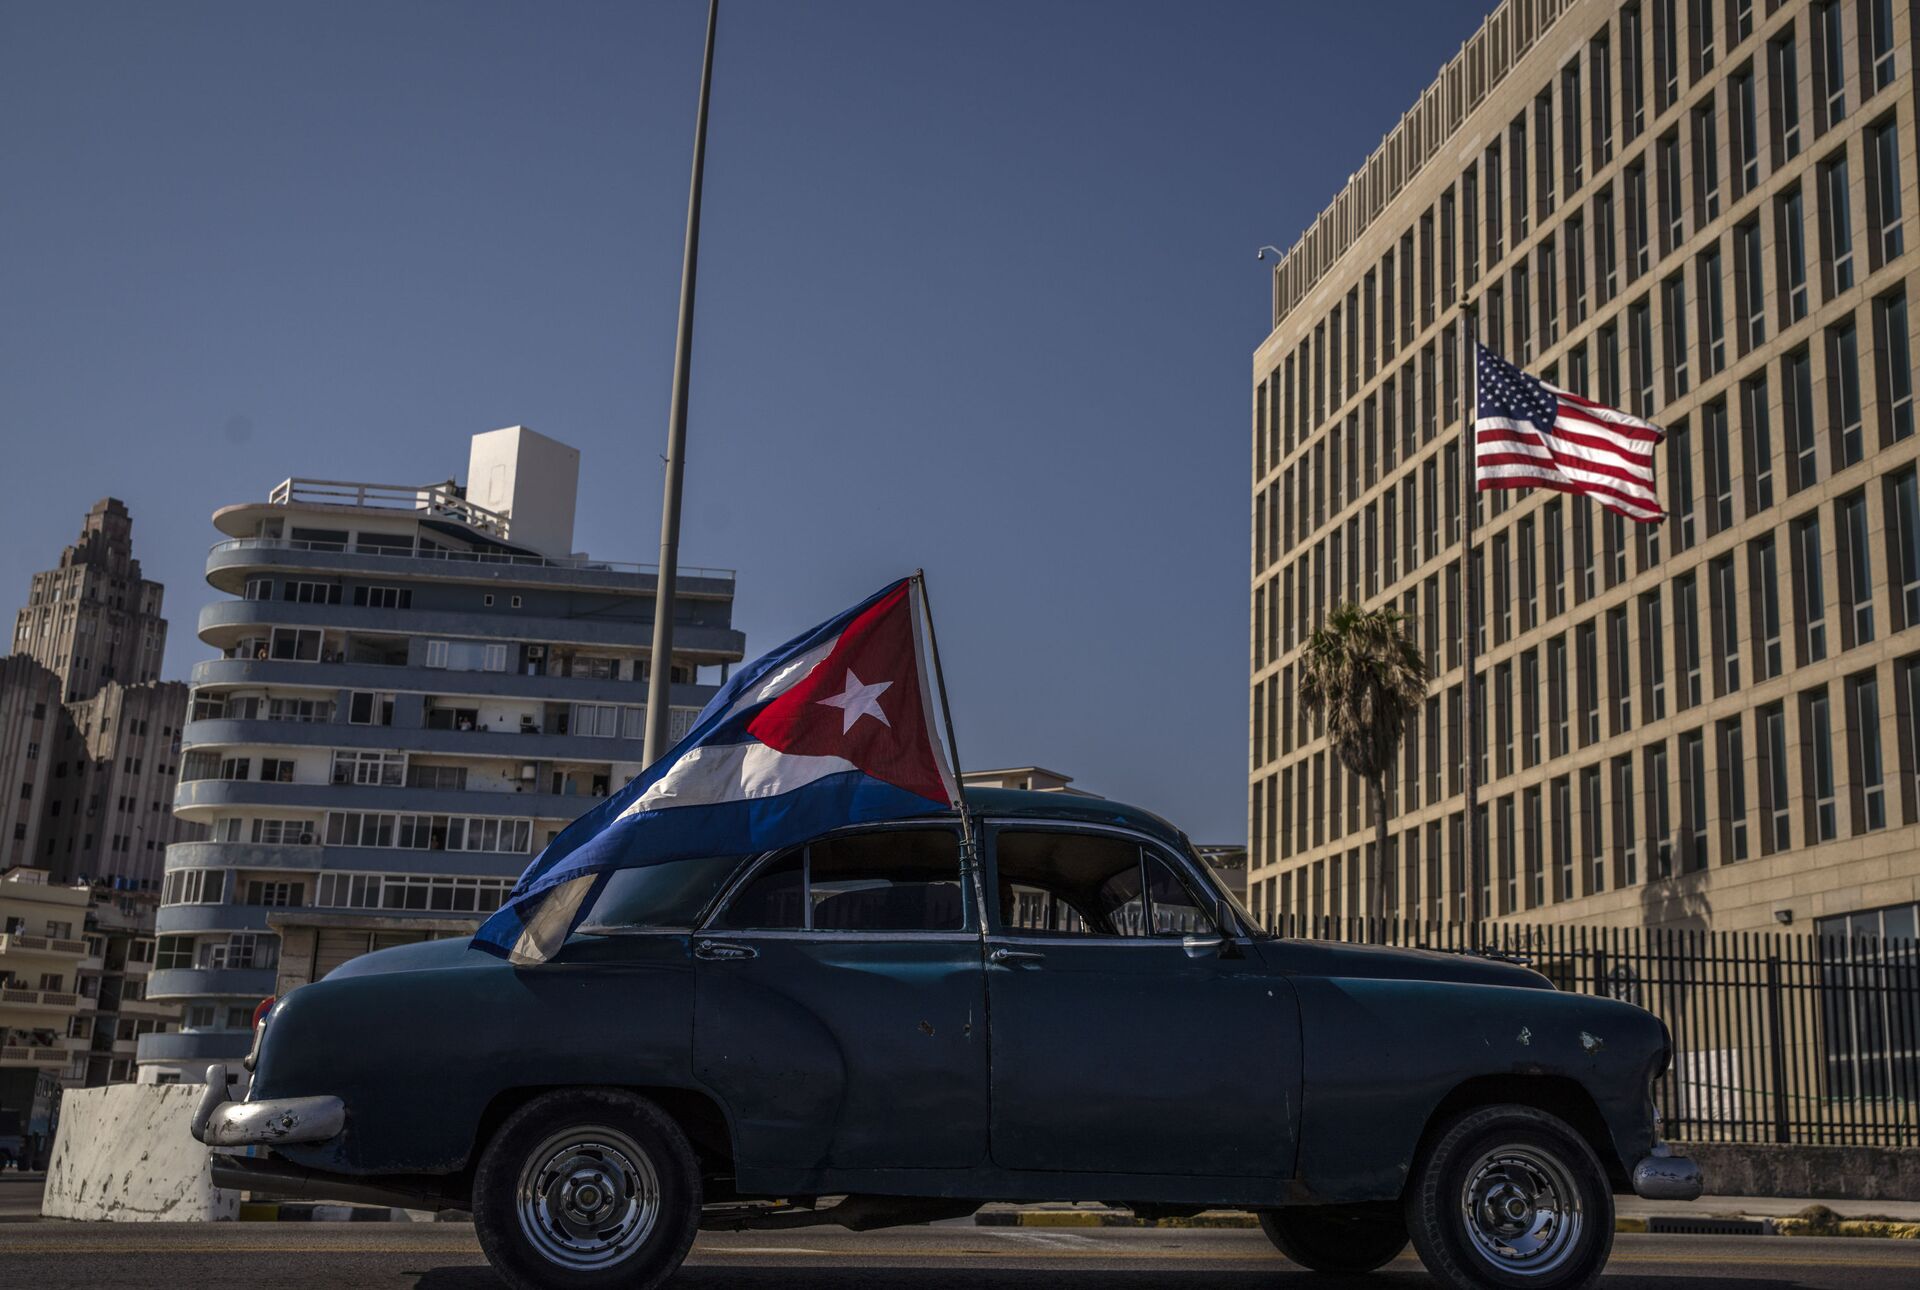 A classic American car flying a Cuban flag drives past the American embassy during a rally calling for the end of the US blockade against the island nation, in Havana, Cuba, Sunday, March 28, 2021. - Sputnik International, 1920, 07.09.2021